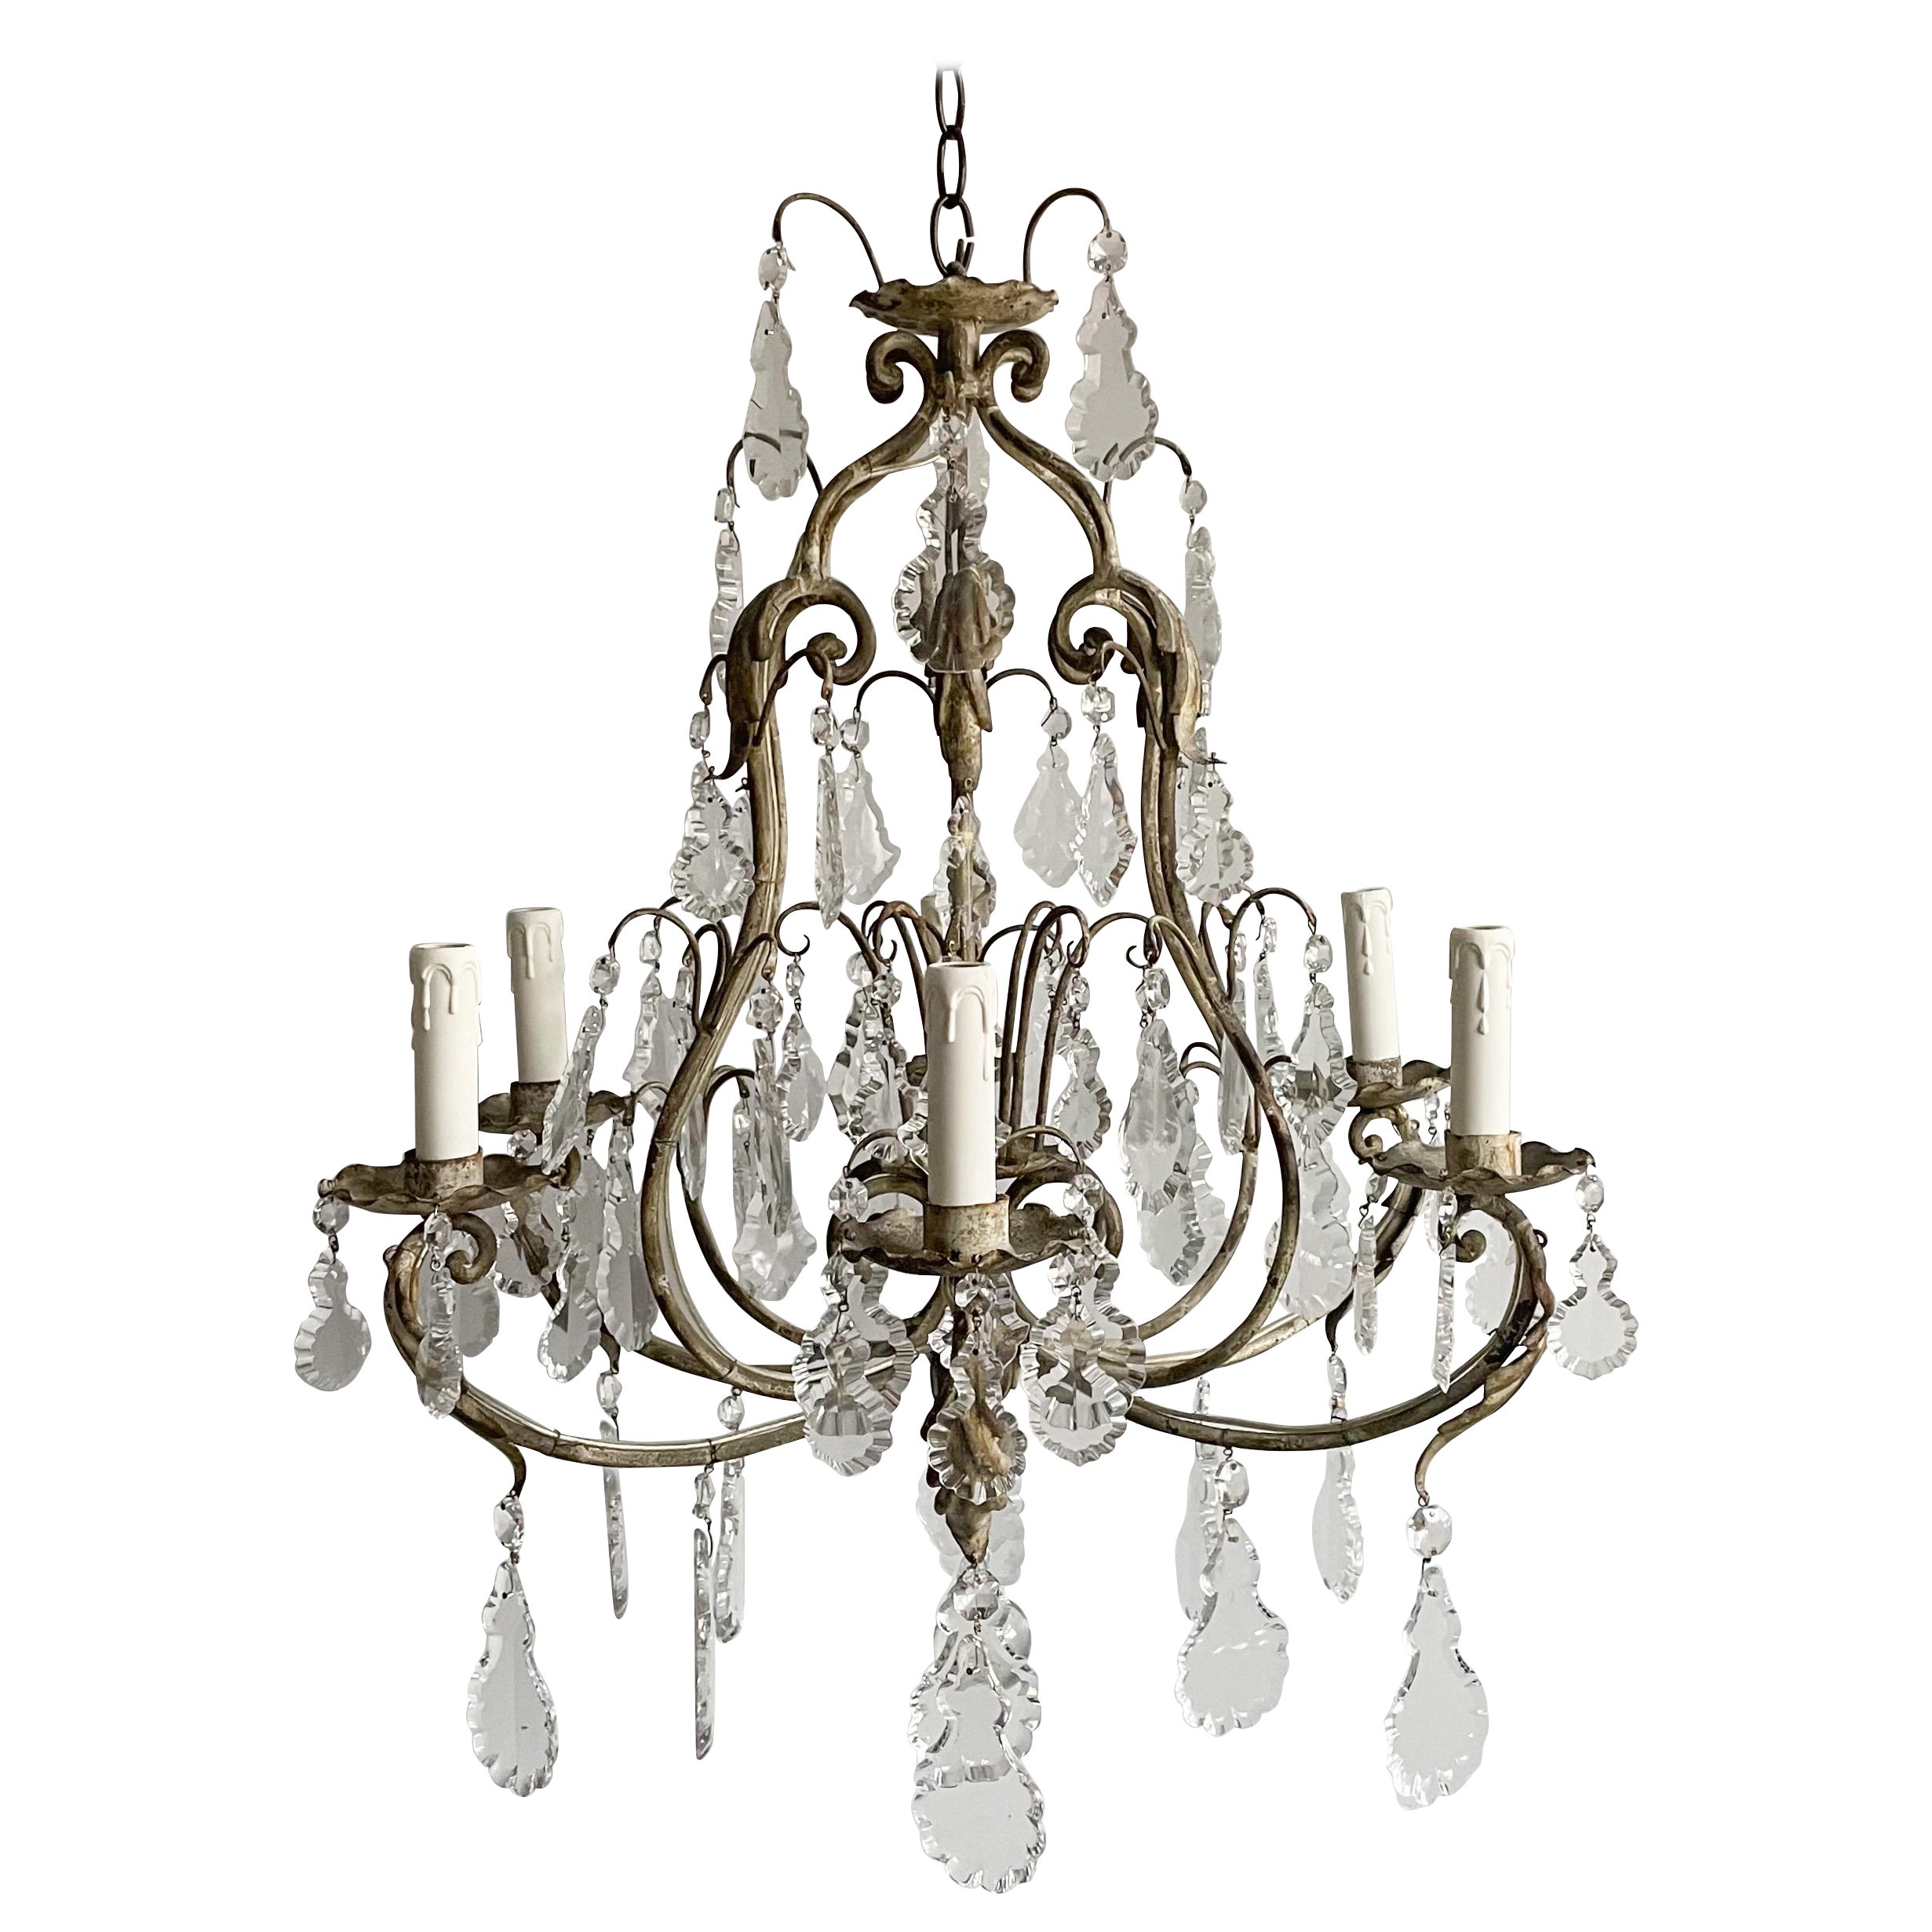 French Provincial-Style Iron and Crystal Chandelier